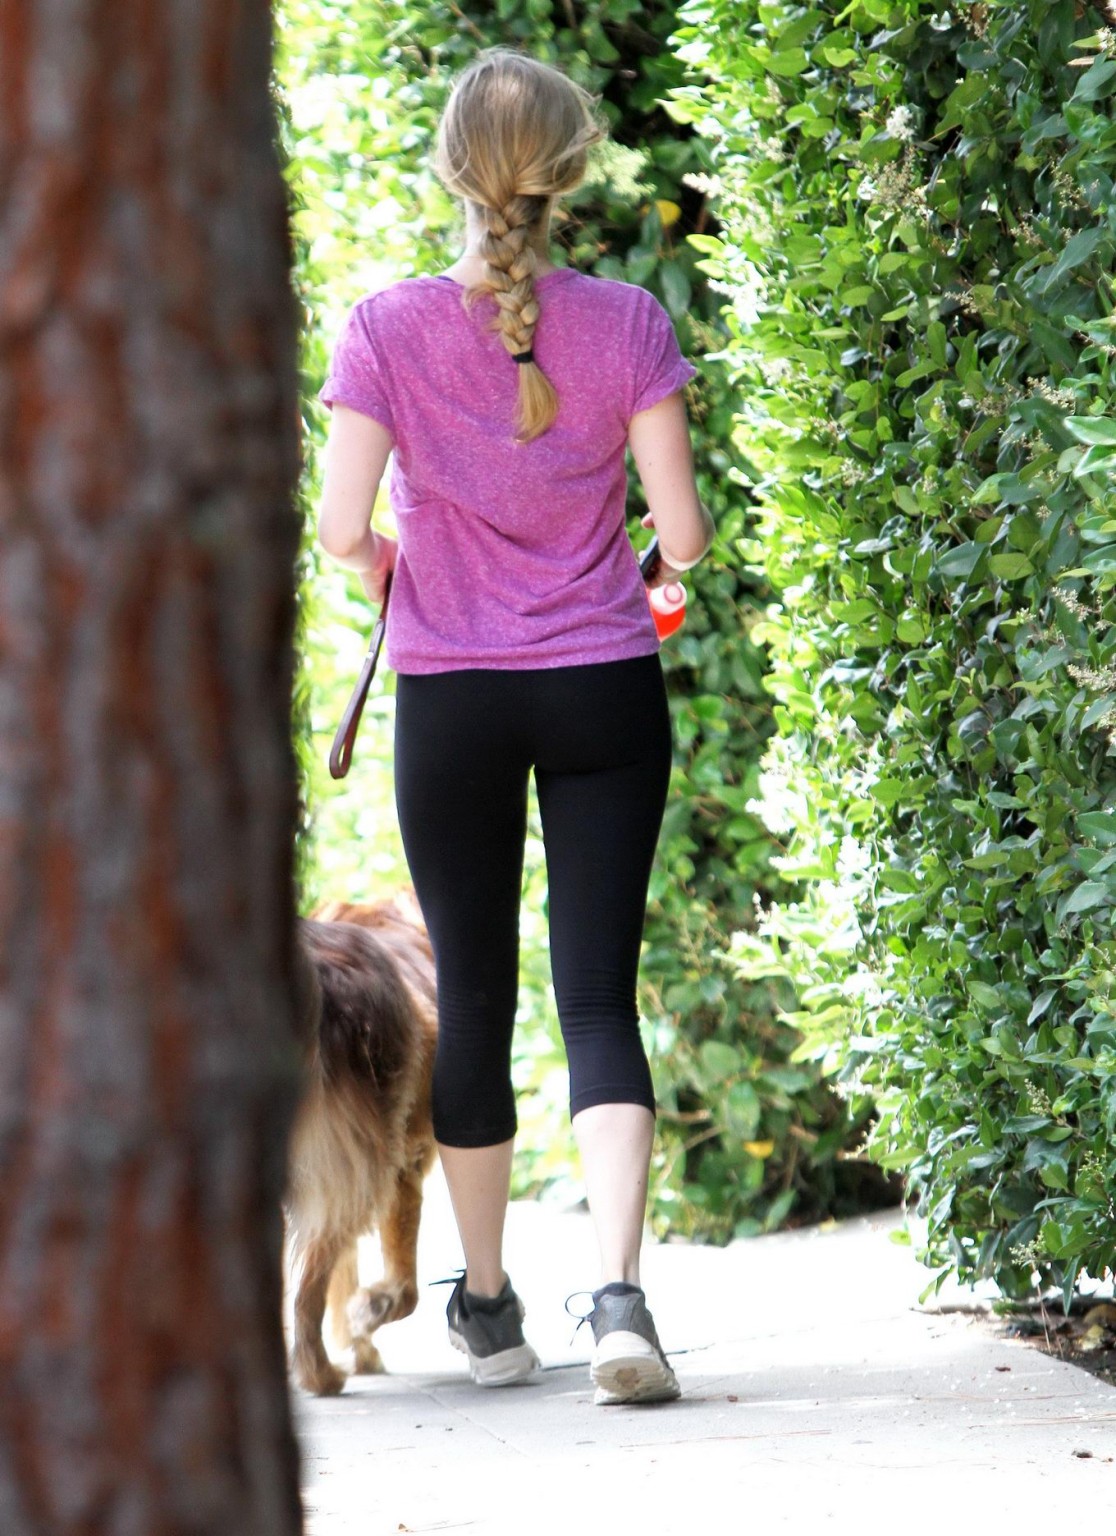 Amanda Seyfried shows her ass in black tights while hiking Runyon Canyon in Cali #75258029